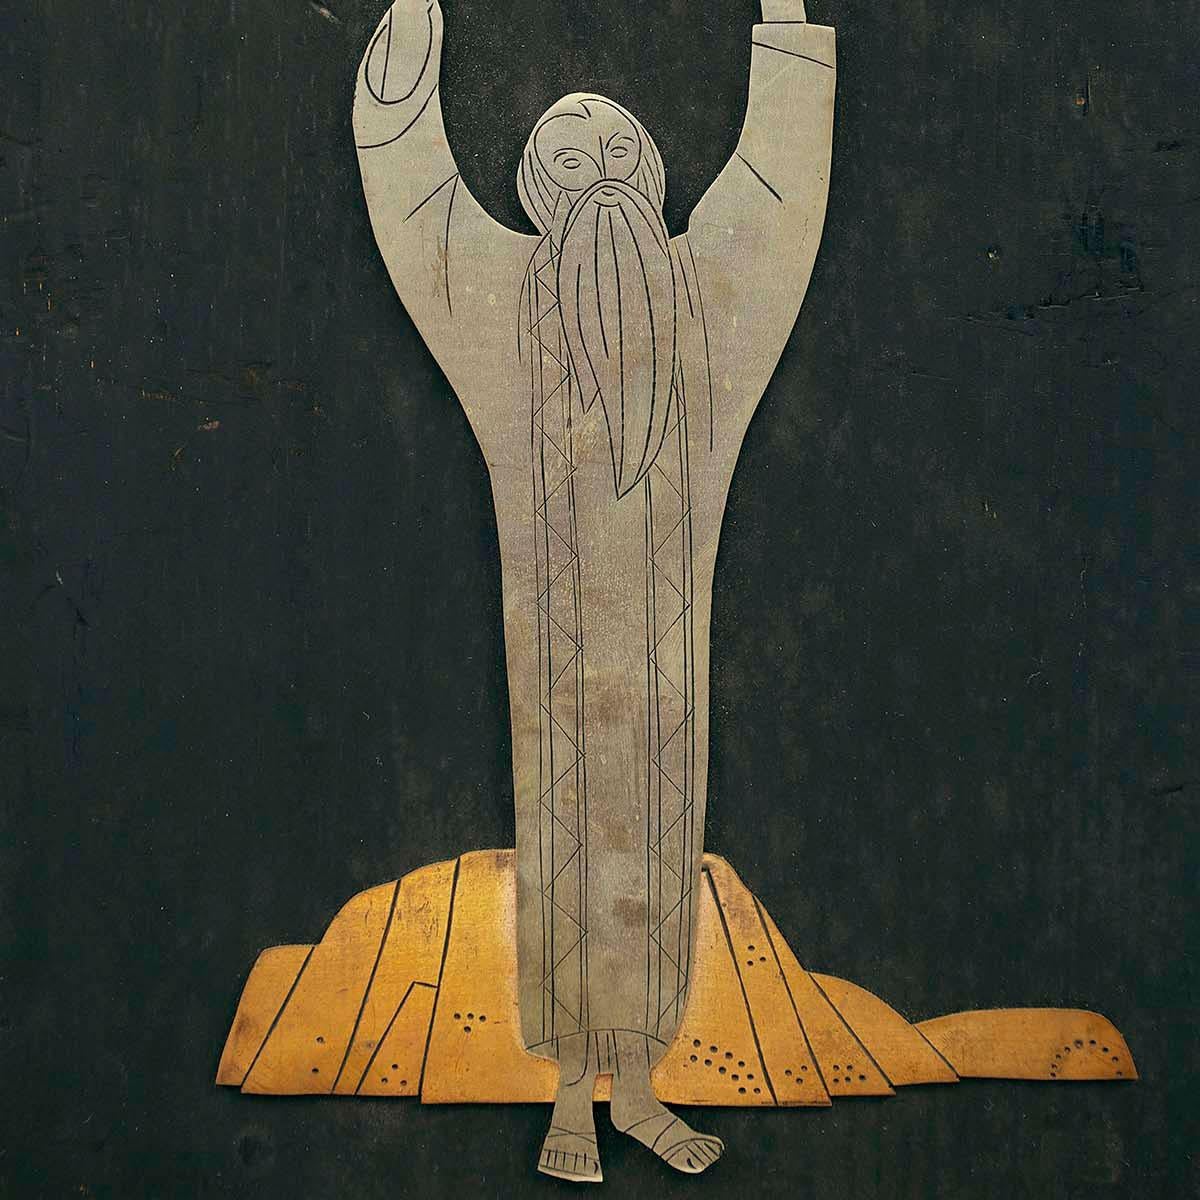 In this art work the artist portrays Moses holding the Ten Commandments by overlaying sheets of metal on top of each other. The composition is flat, and the figure shows cartoon-like features.